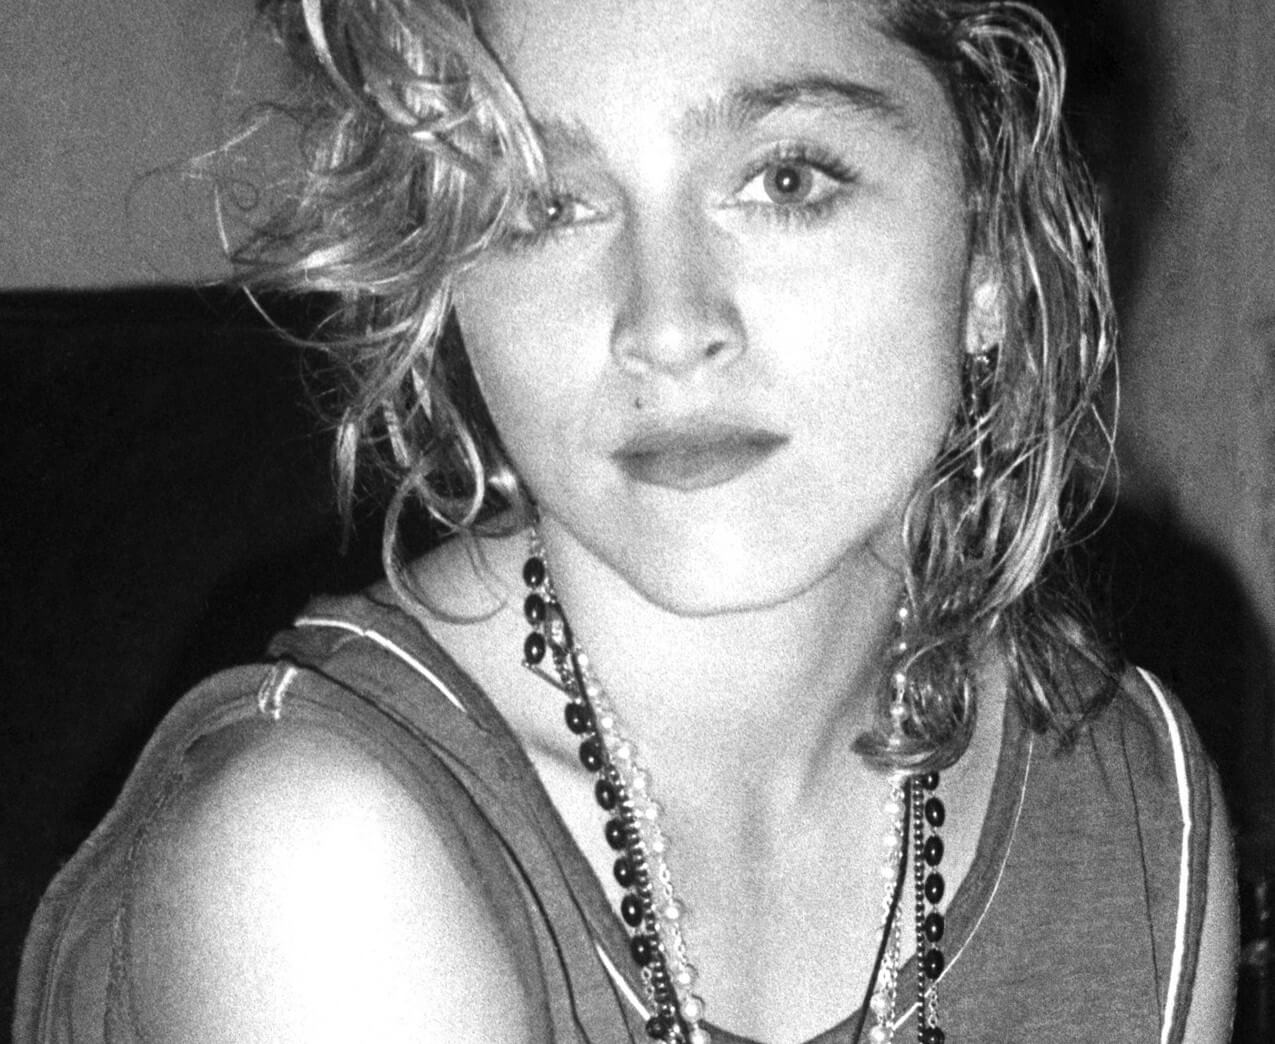 "Holiday" singer Madonna in black-and-white